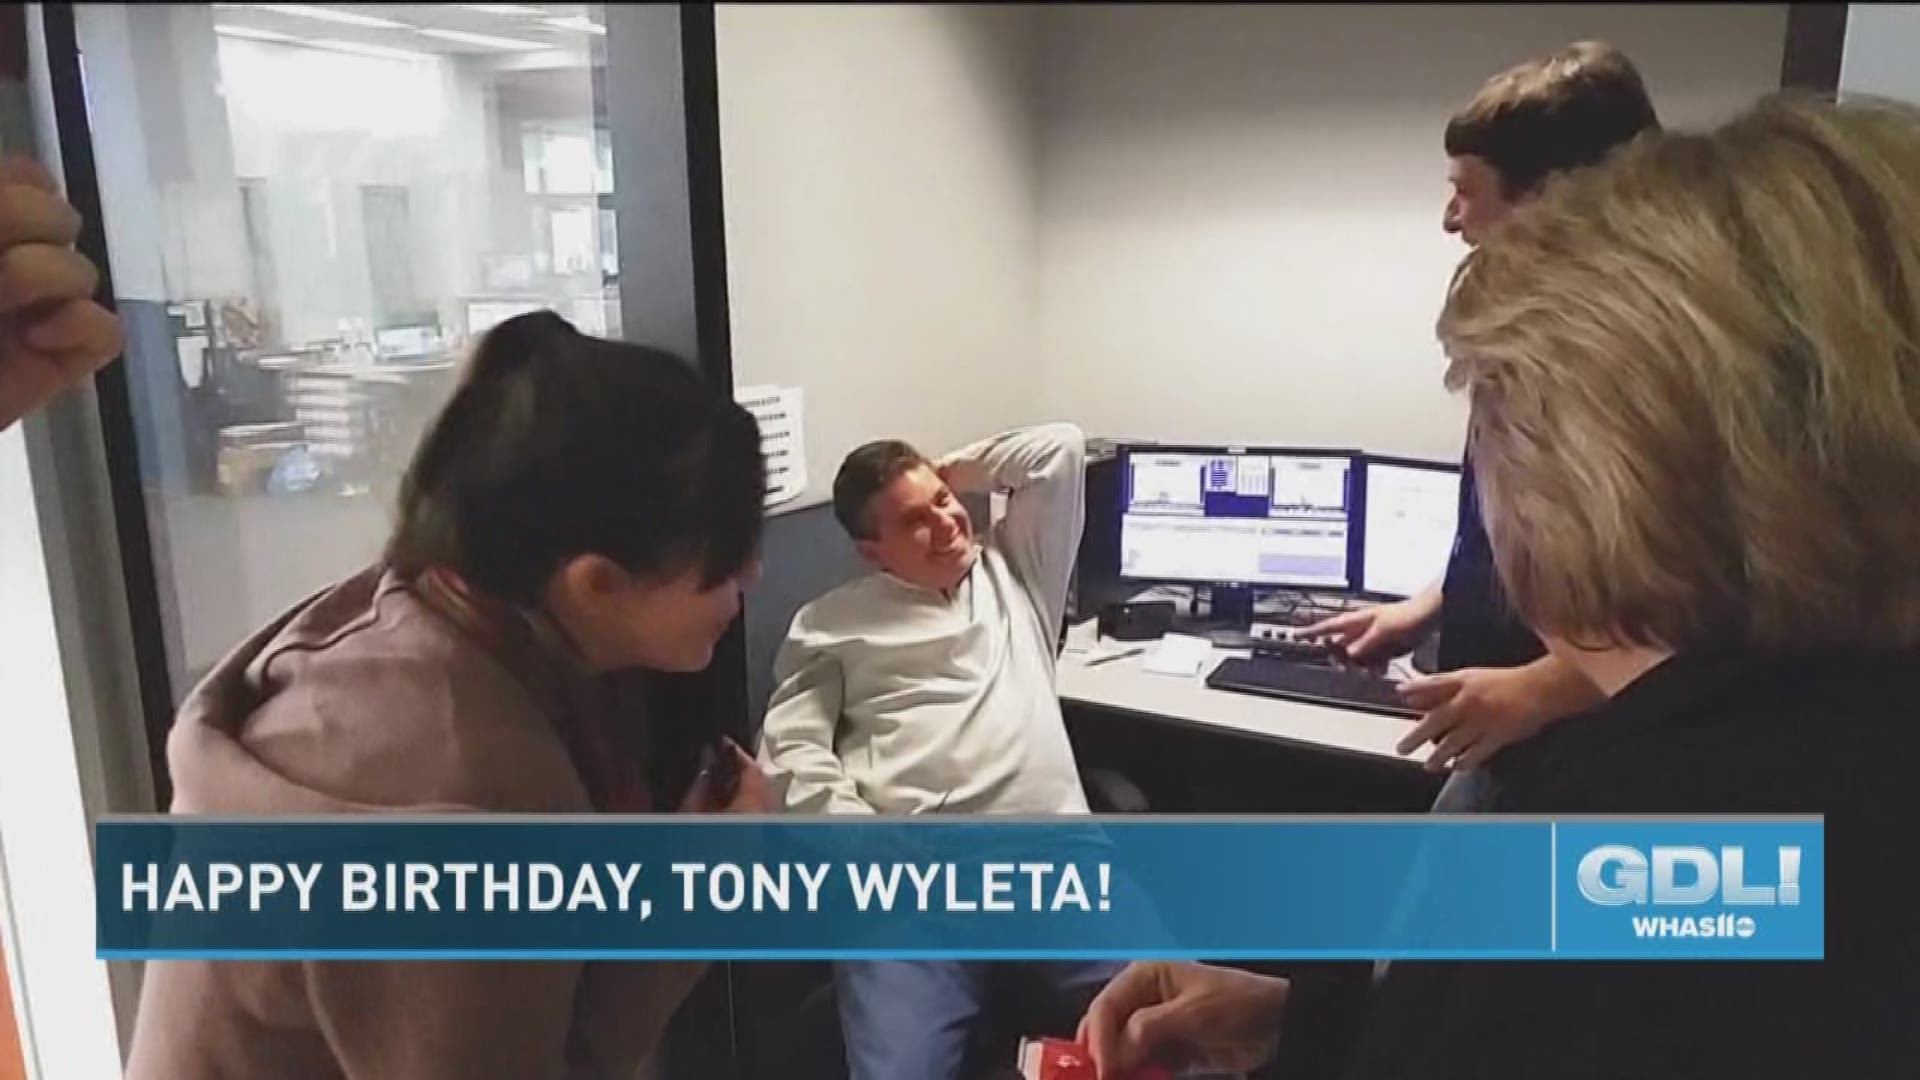 Great Day Live photographer Tony Wyleta thought he could be sneaky since his birthday was over the weekend, but we didn't want to pass up the opportunity to get him a cake...and eat some too!